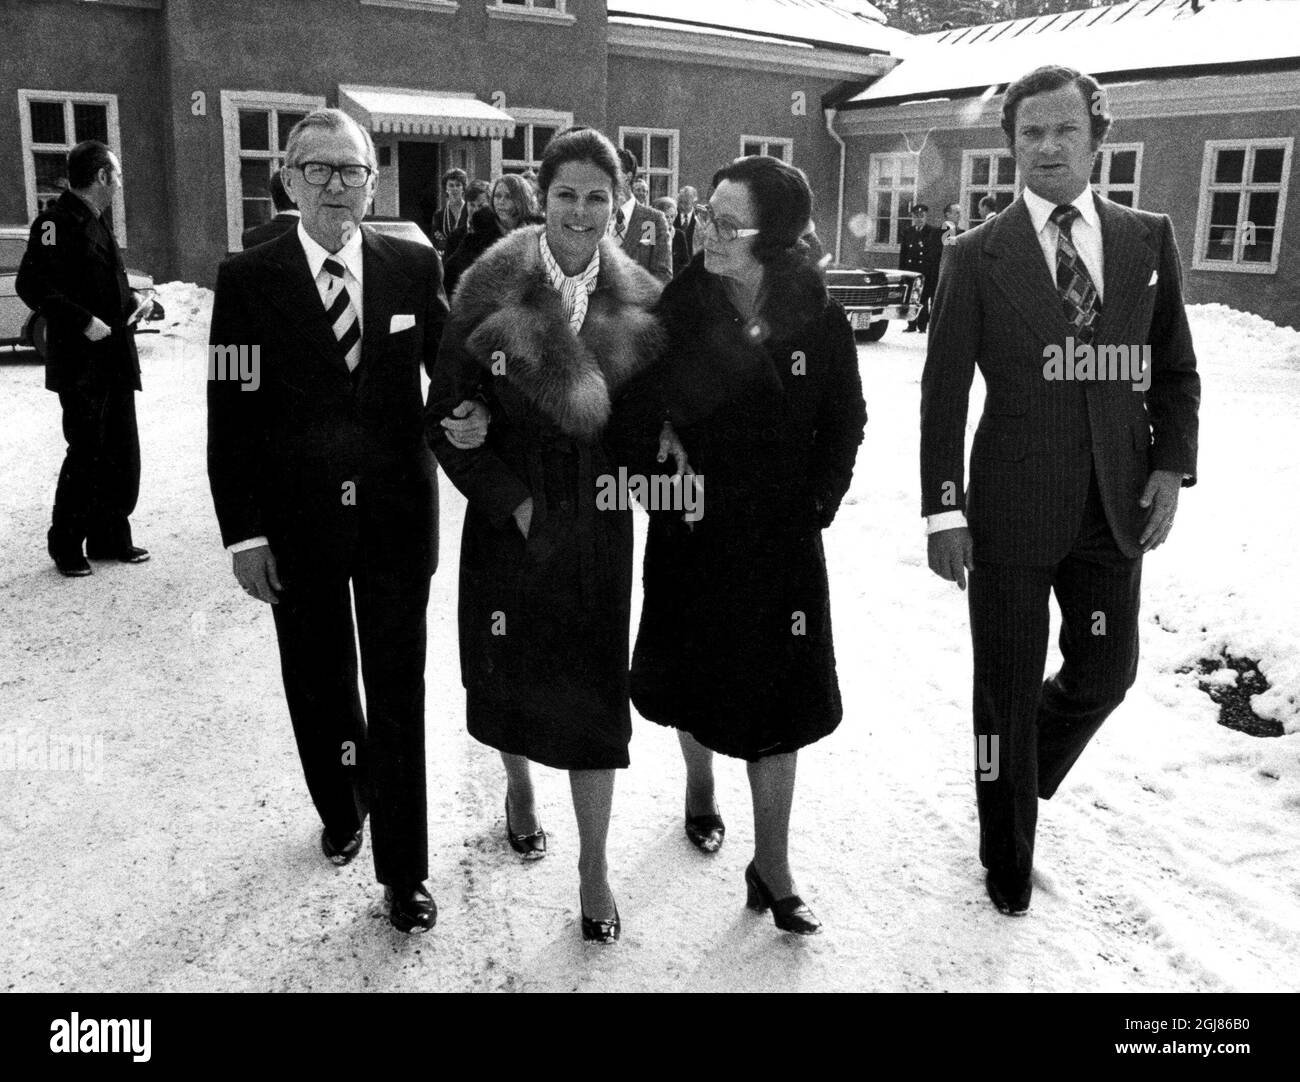 Â© SCANPIX, Stockholm, Sweden, 19760313, Foto: Gunnar Lundmark / SCANPIX Code 31002** File ***According to the Swedish daily newspaper Expressen the father of Queens Silvia of Sweden, Walther Sommerlath, was a member of the German naziparty during the war. Walther Sommerlath worked as a businessman in Heidelberg, Germany as well as in Brazil during the WWII. Photo; (l-r) Walther Sommerlath, Queen Silvia, Alce Sommerlath and King Carl Gustav Stock Photo